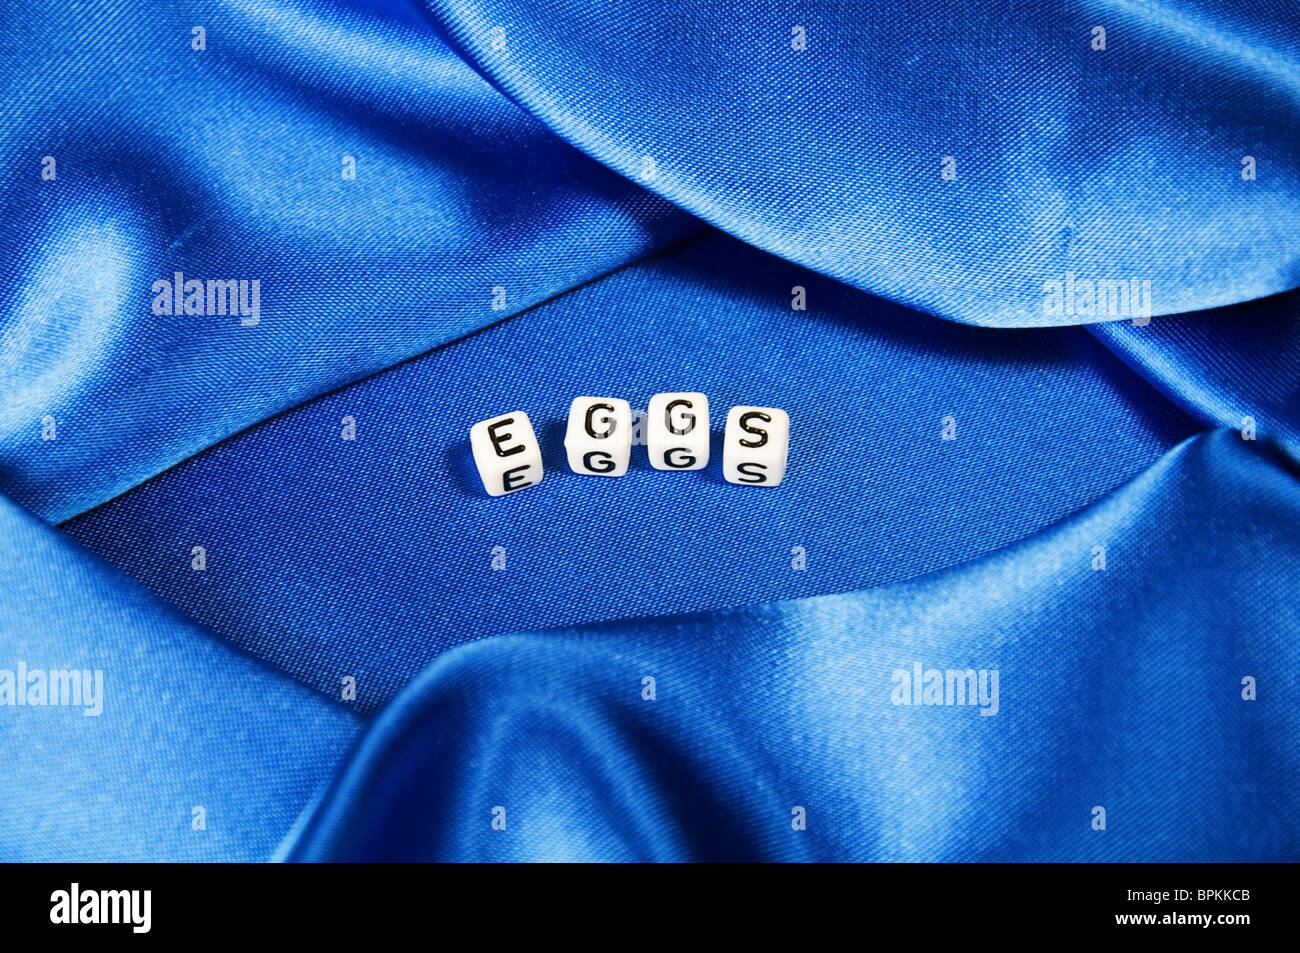 Royal blue satin background with rich folds and wrinkles for texture is the word eggs in black and white cube lettering series Stock Photo